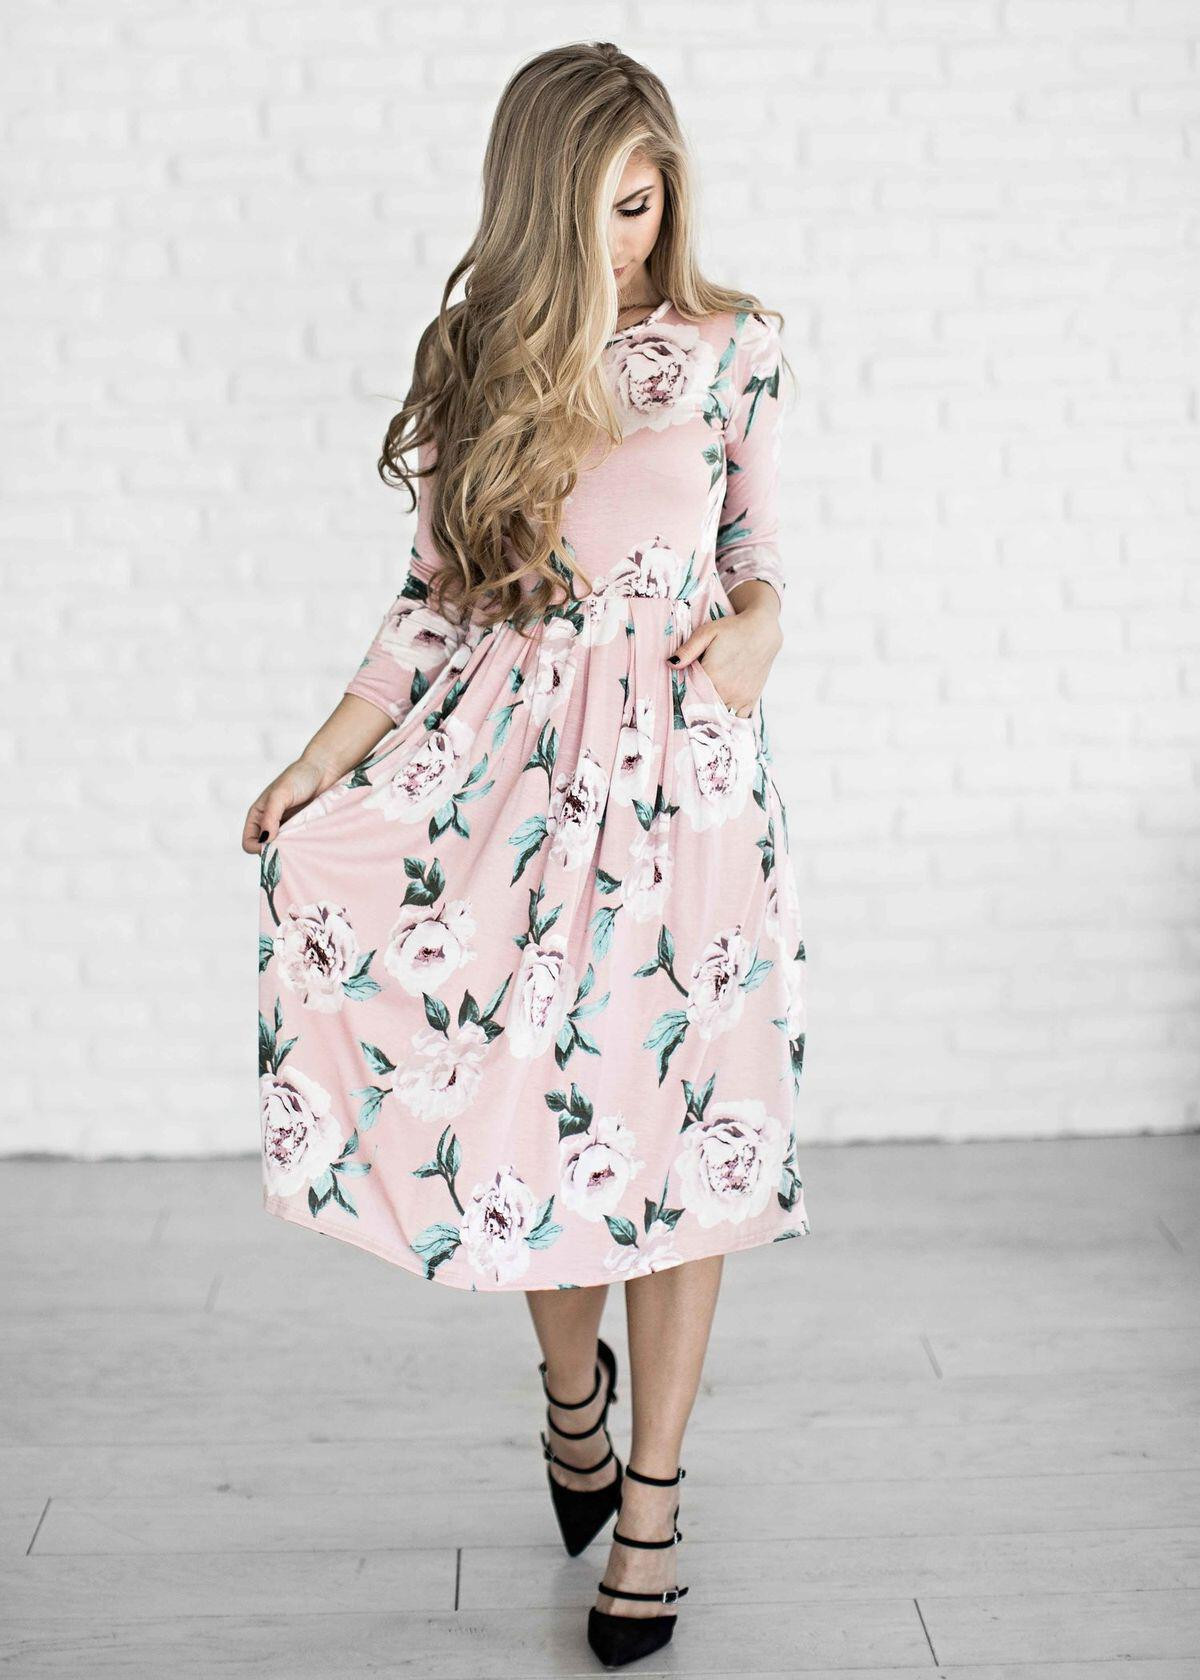 Easter Outfit Ideas For Women
 15 stylish church Easter outfits for women to ideas